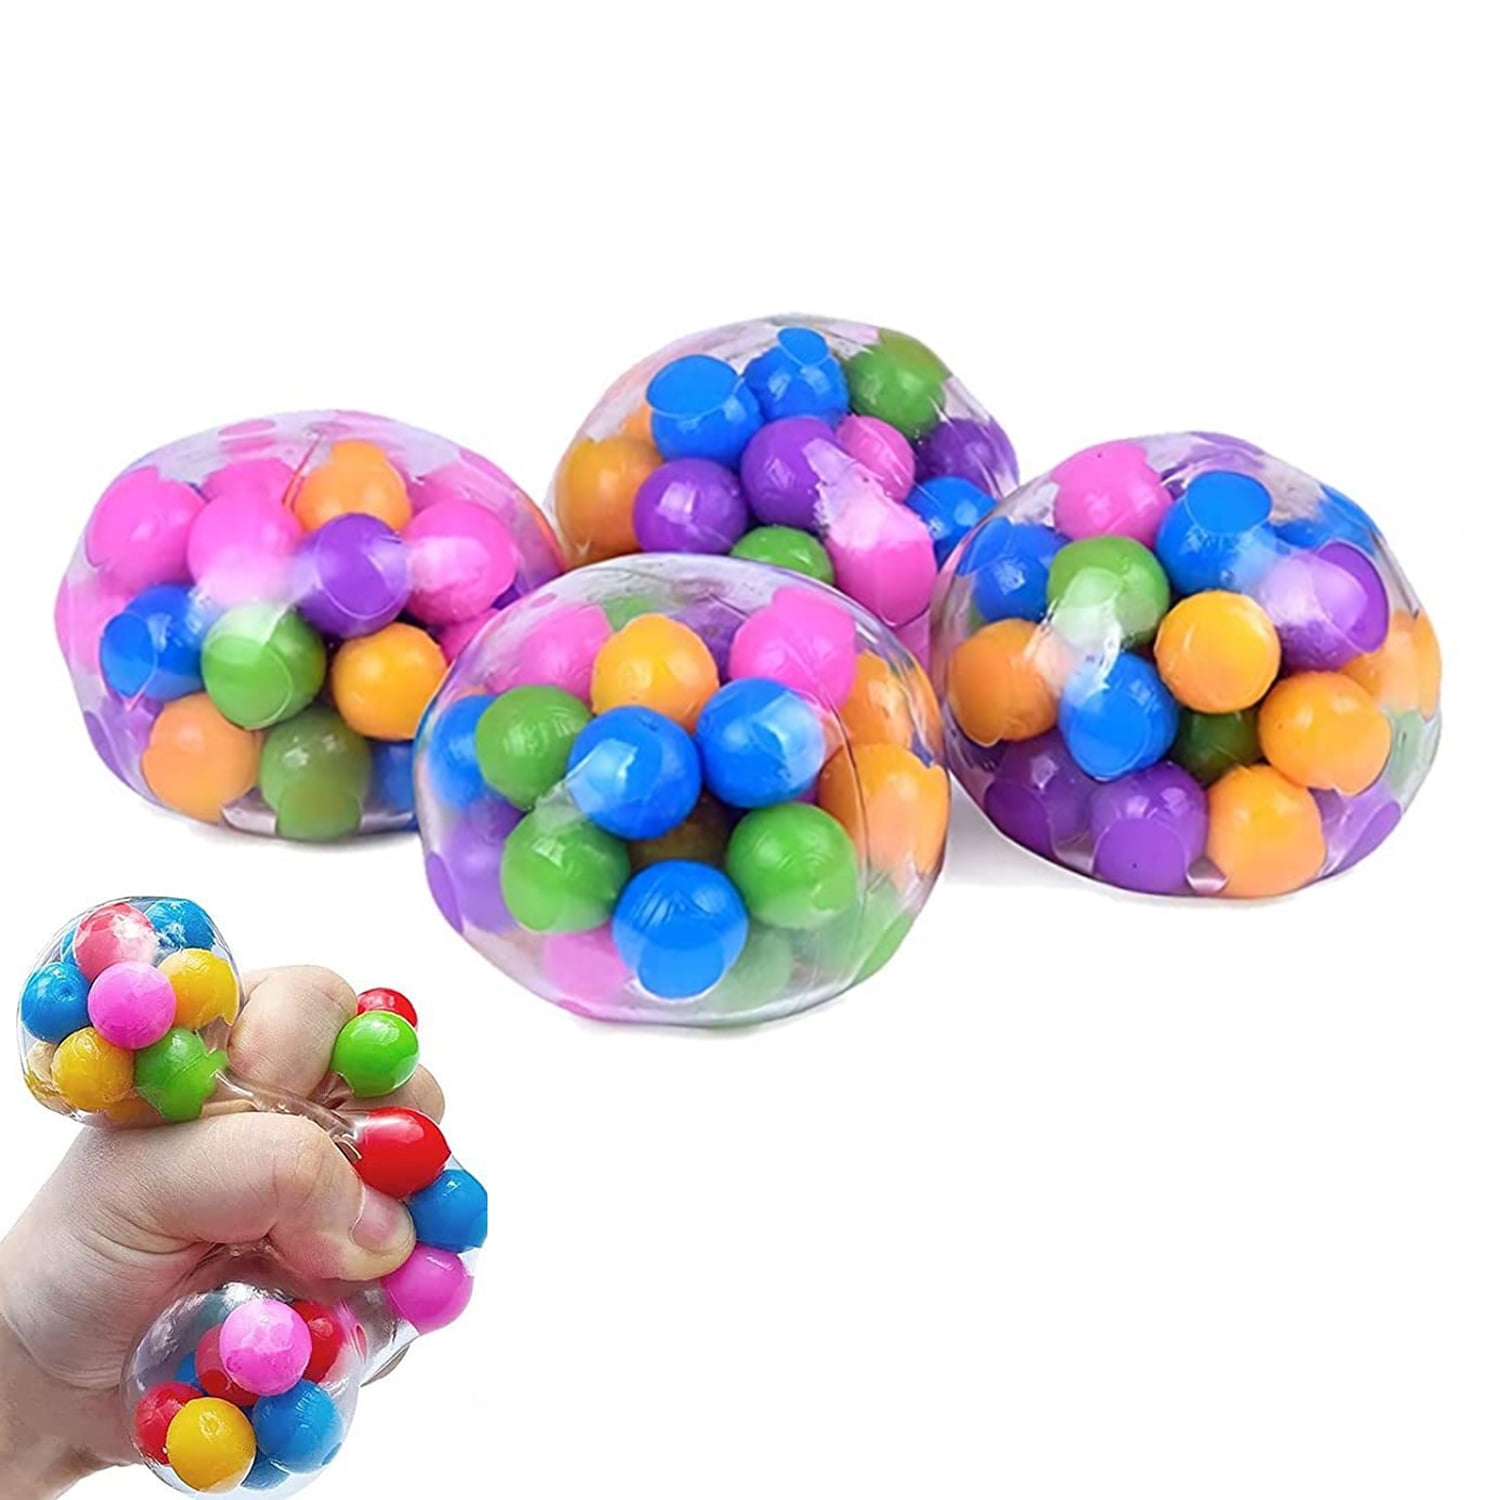 School 3PC Ounabing Creative Sensory Stress Relief Balls Squishy Stress Ball Fidget Toys Relaxing & Calming Desk Soft Squeeze Toy for Office 